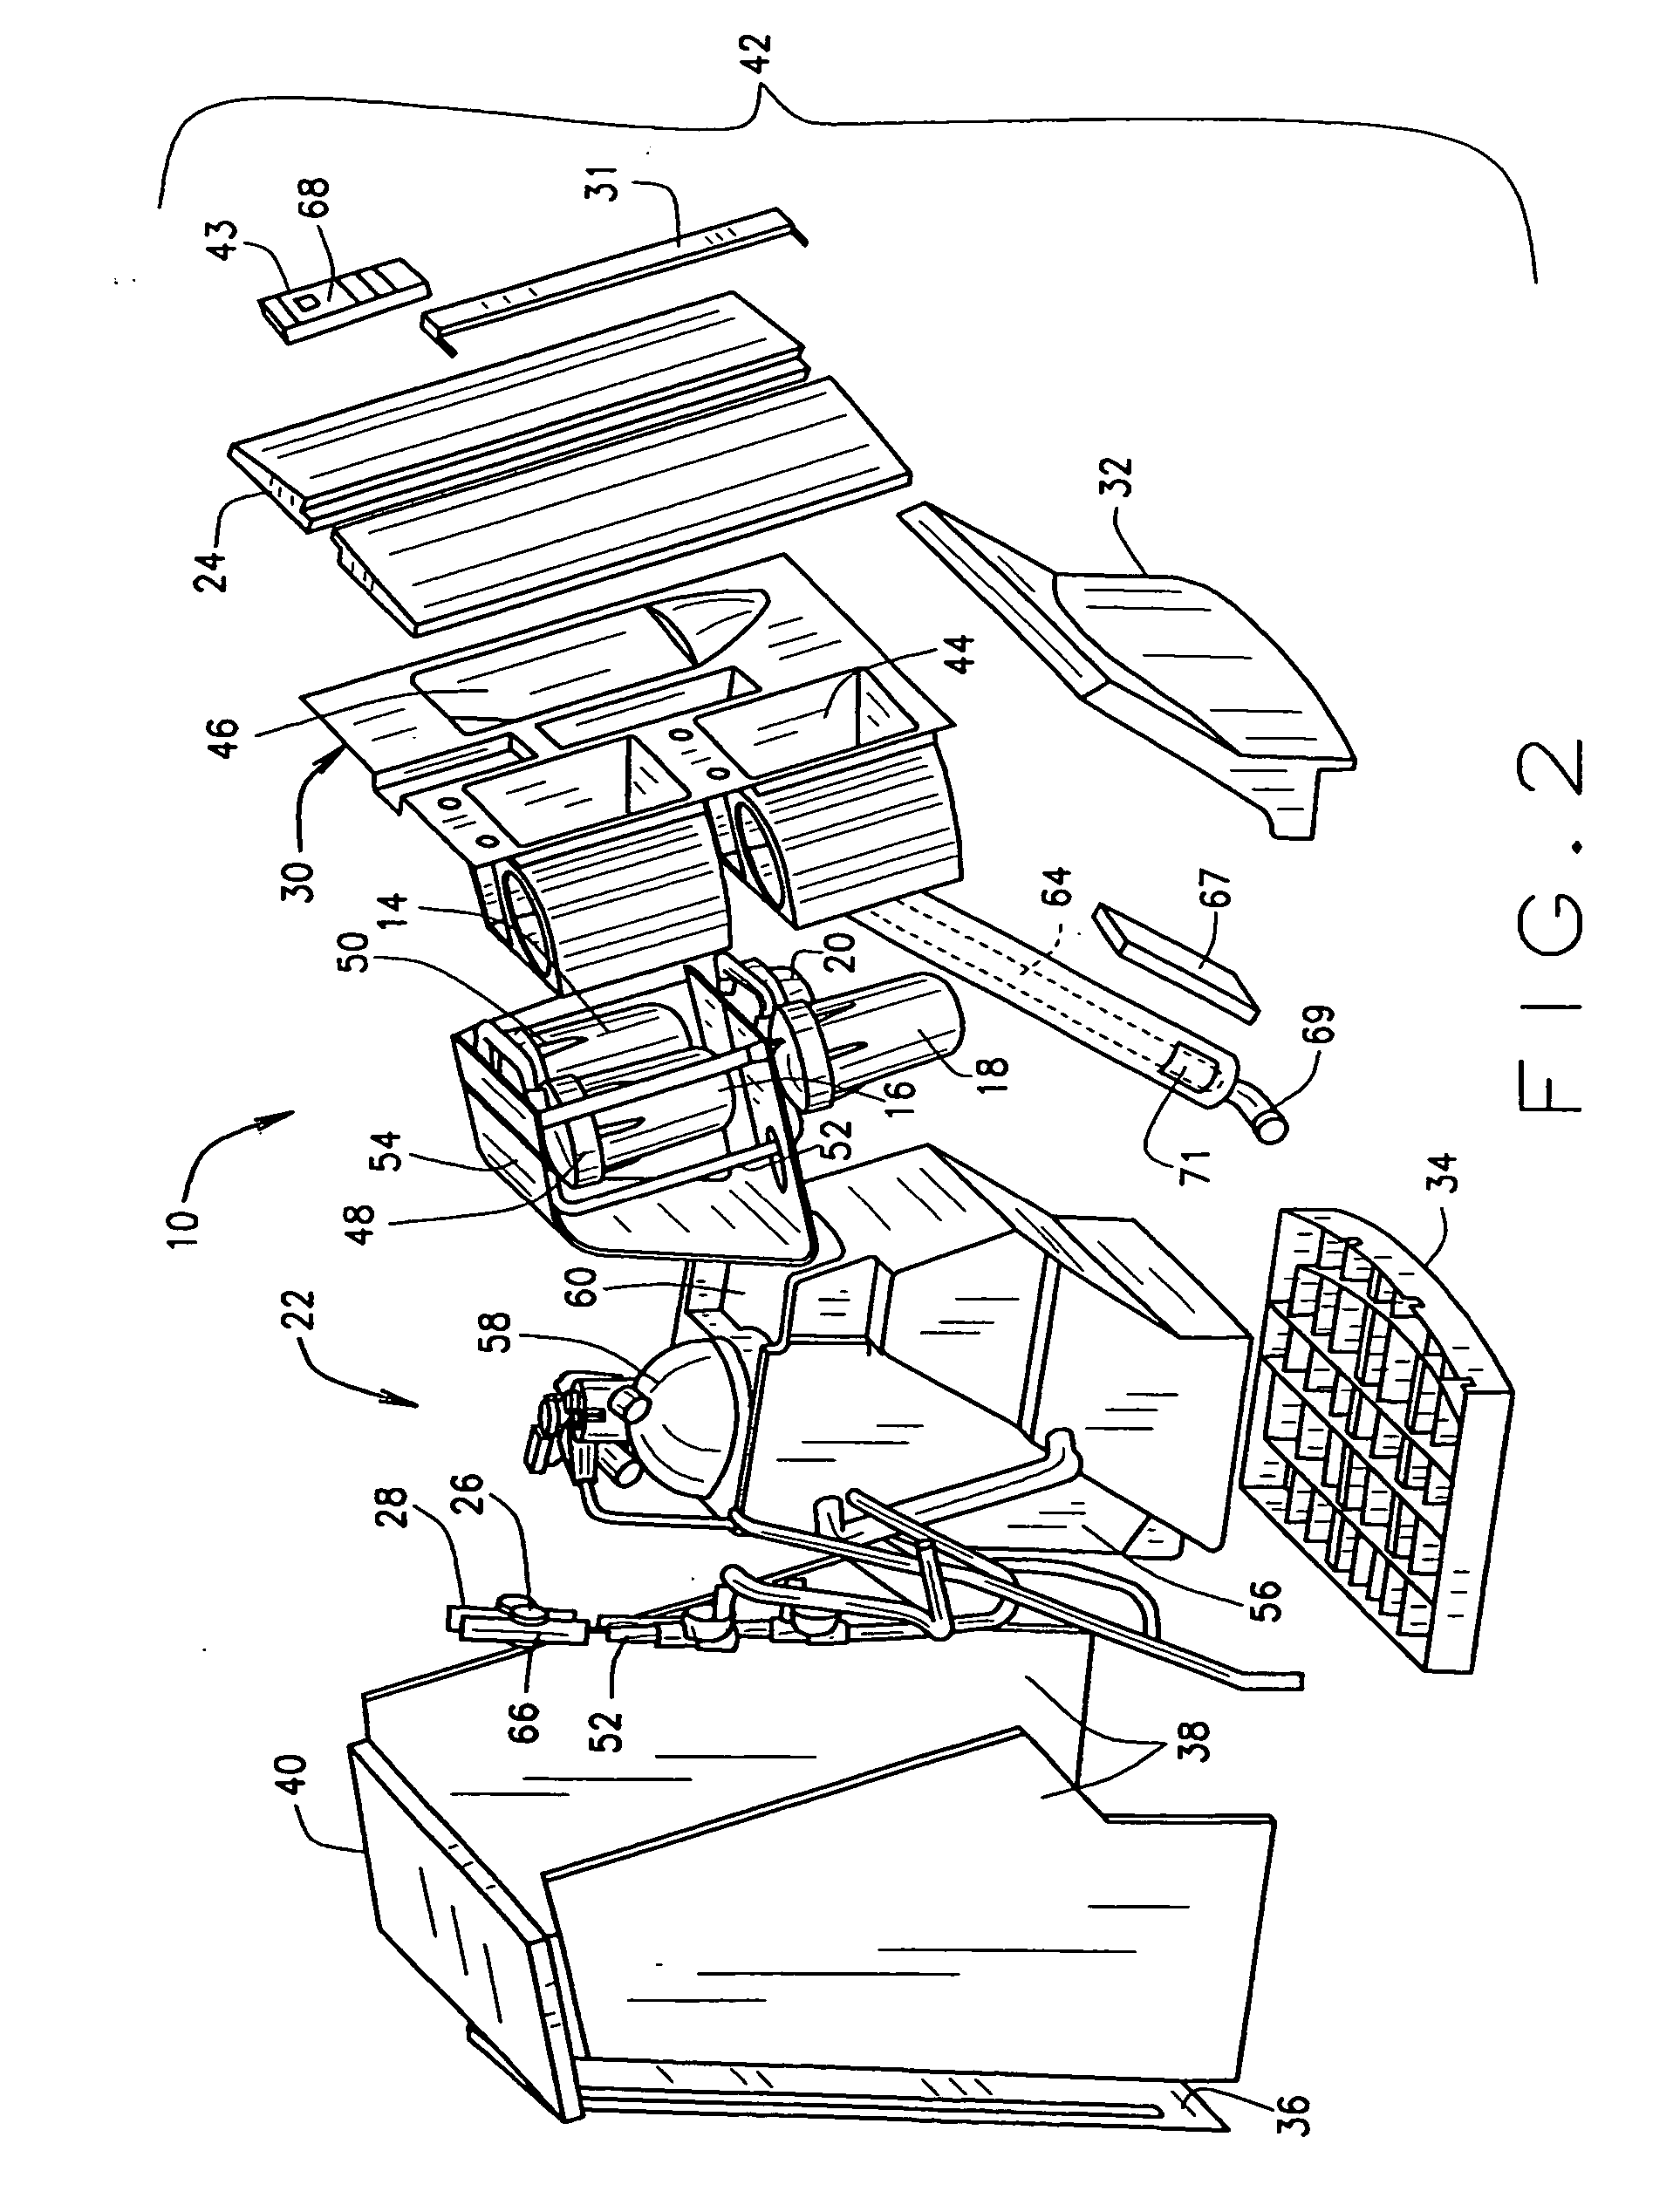 Control method and apparatus for a water treatment system